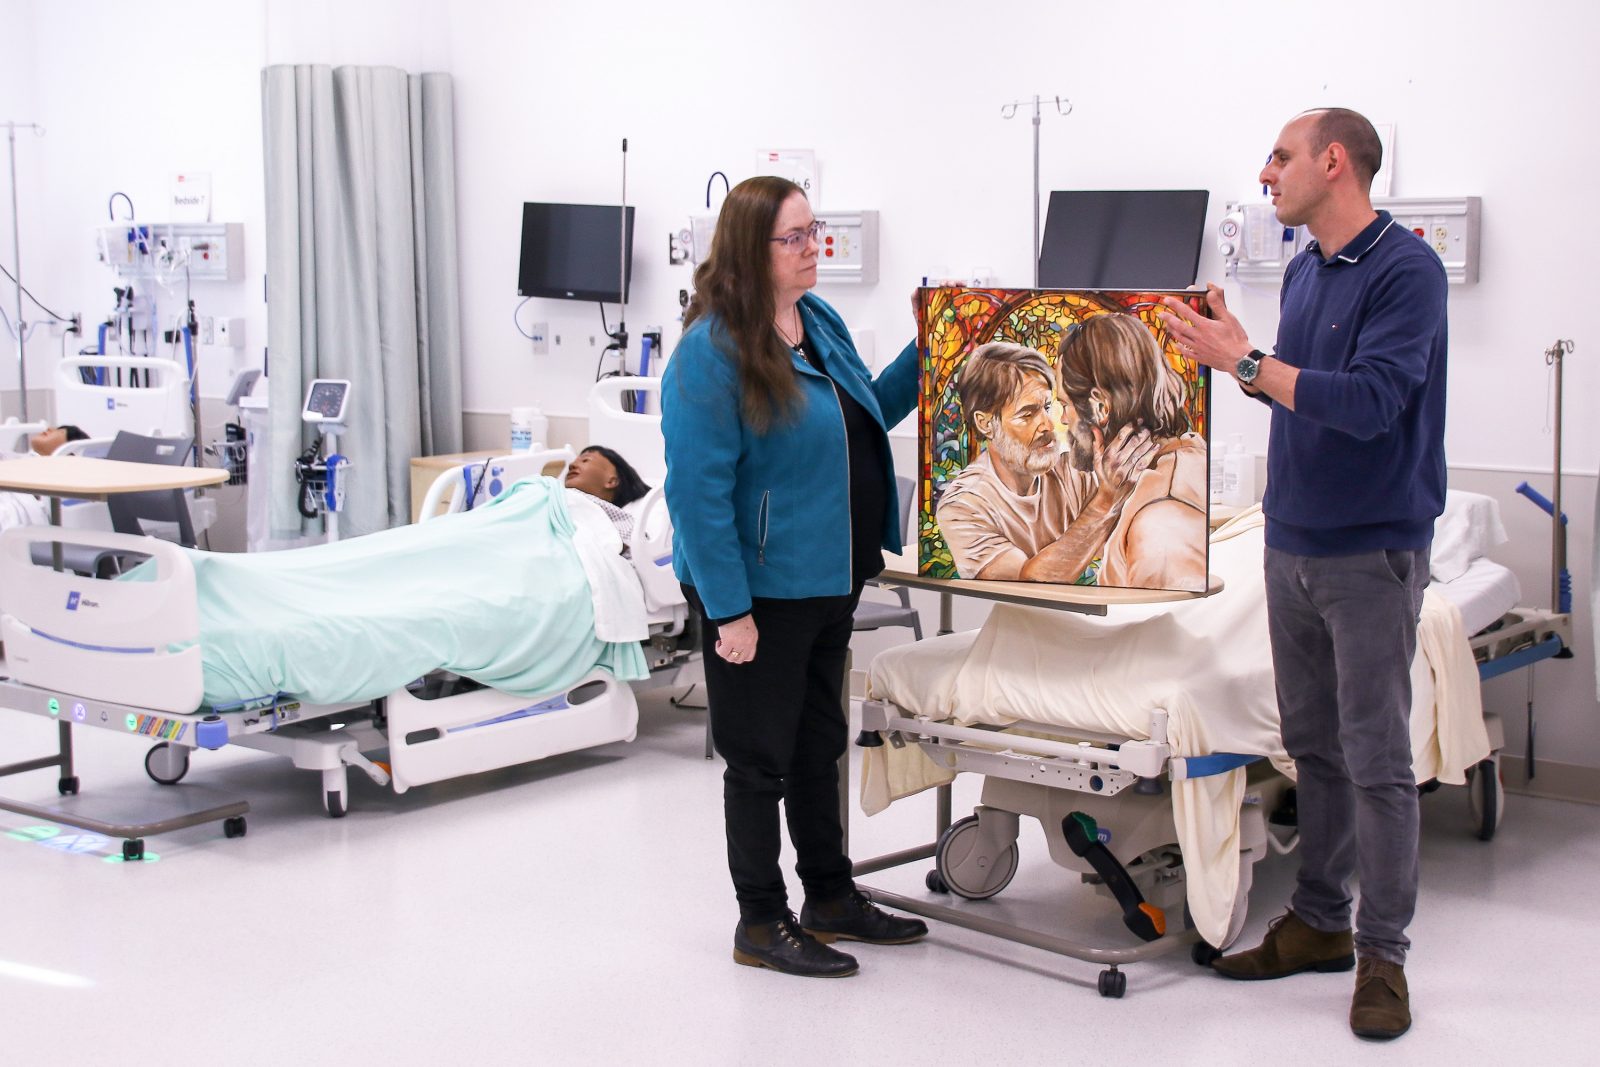 Two people stand in the middle of a Nursing Simulation Lab at Brock University. Patient simulators are in hospital beds behind them while they look at and discuss an oil painting of two men looking deeply into each other’s eyes.